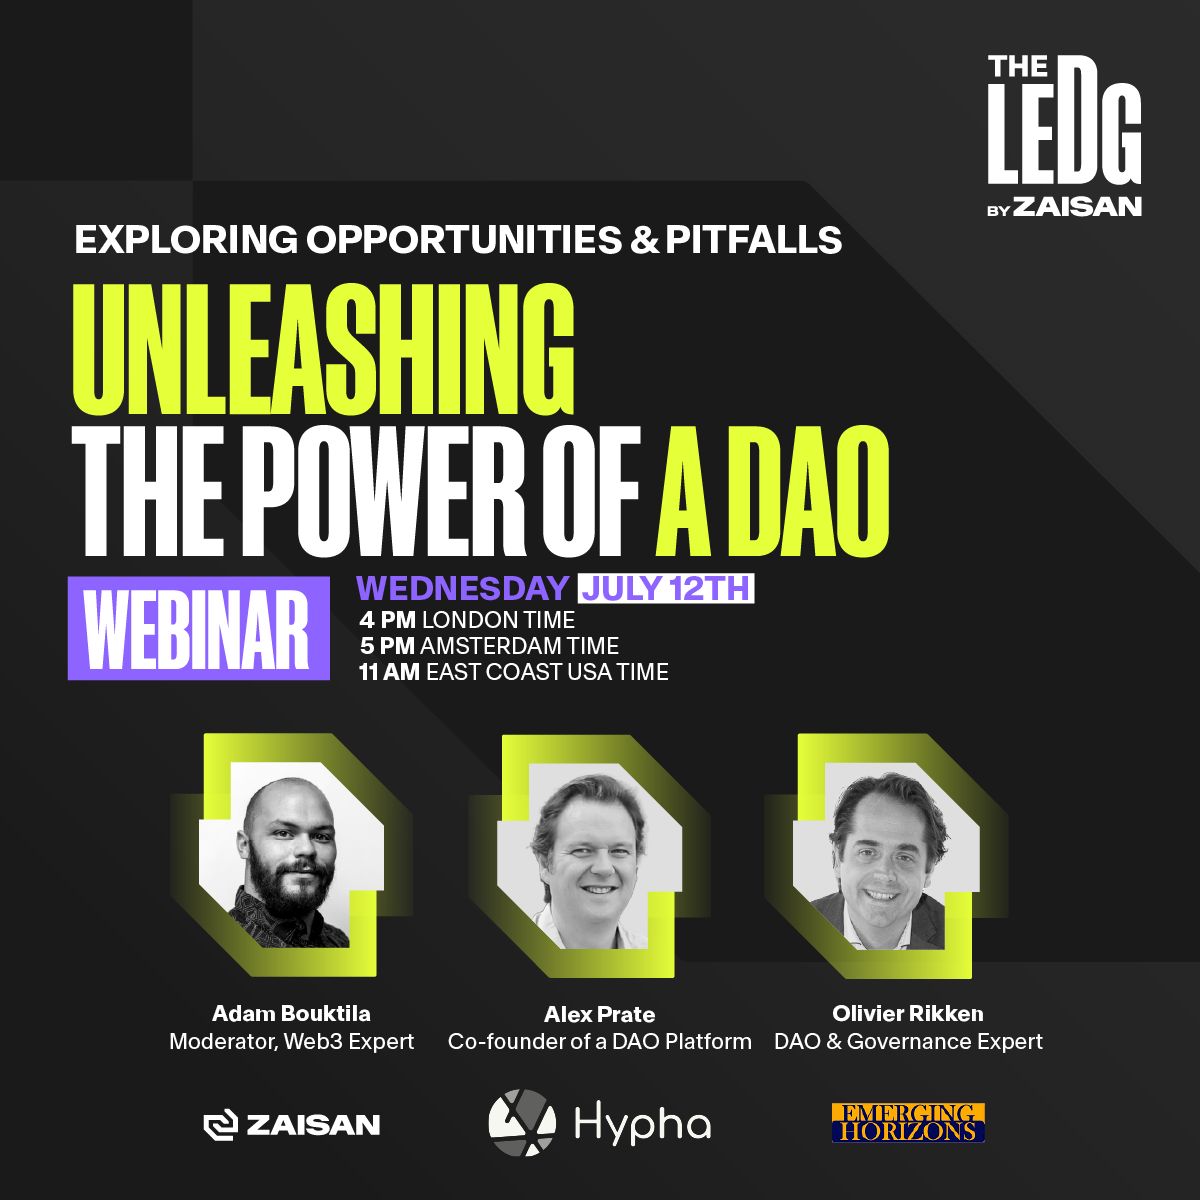 Whether you love or hate the idea of #DAOs, we have a great webinar for you!

Join Hypha's Alex Prate today at 3 pm UTC to participate in @zaisanglobal's webinar 'Unleashing the Power of a DAO' together with Adam Bouktila and @olivier1977. Register below!
zaisan.io/the-ledg/webin…